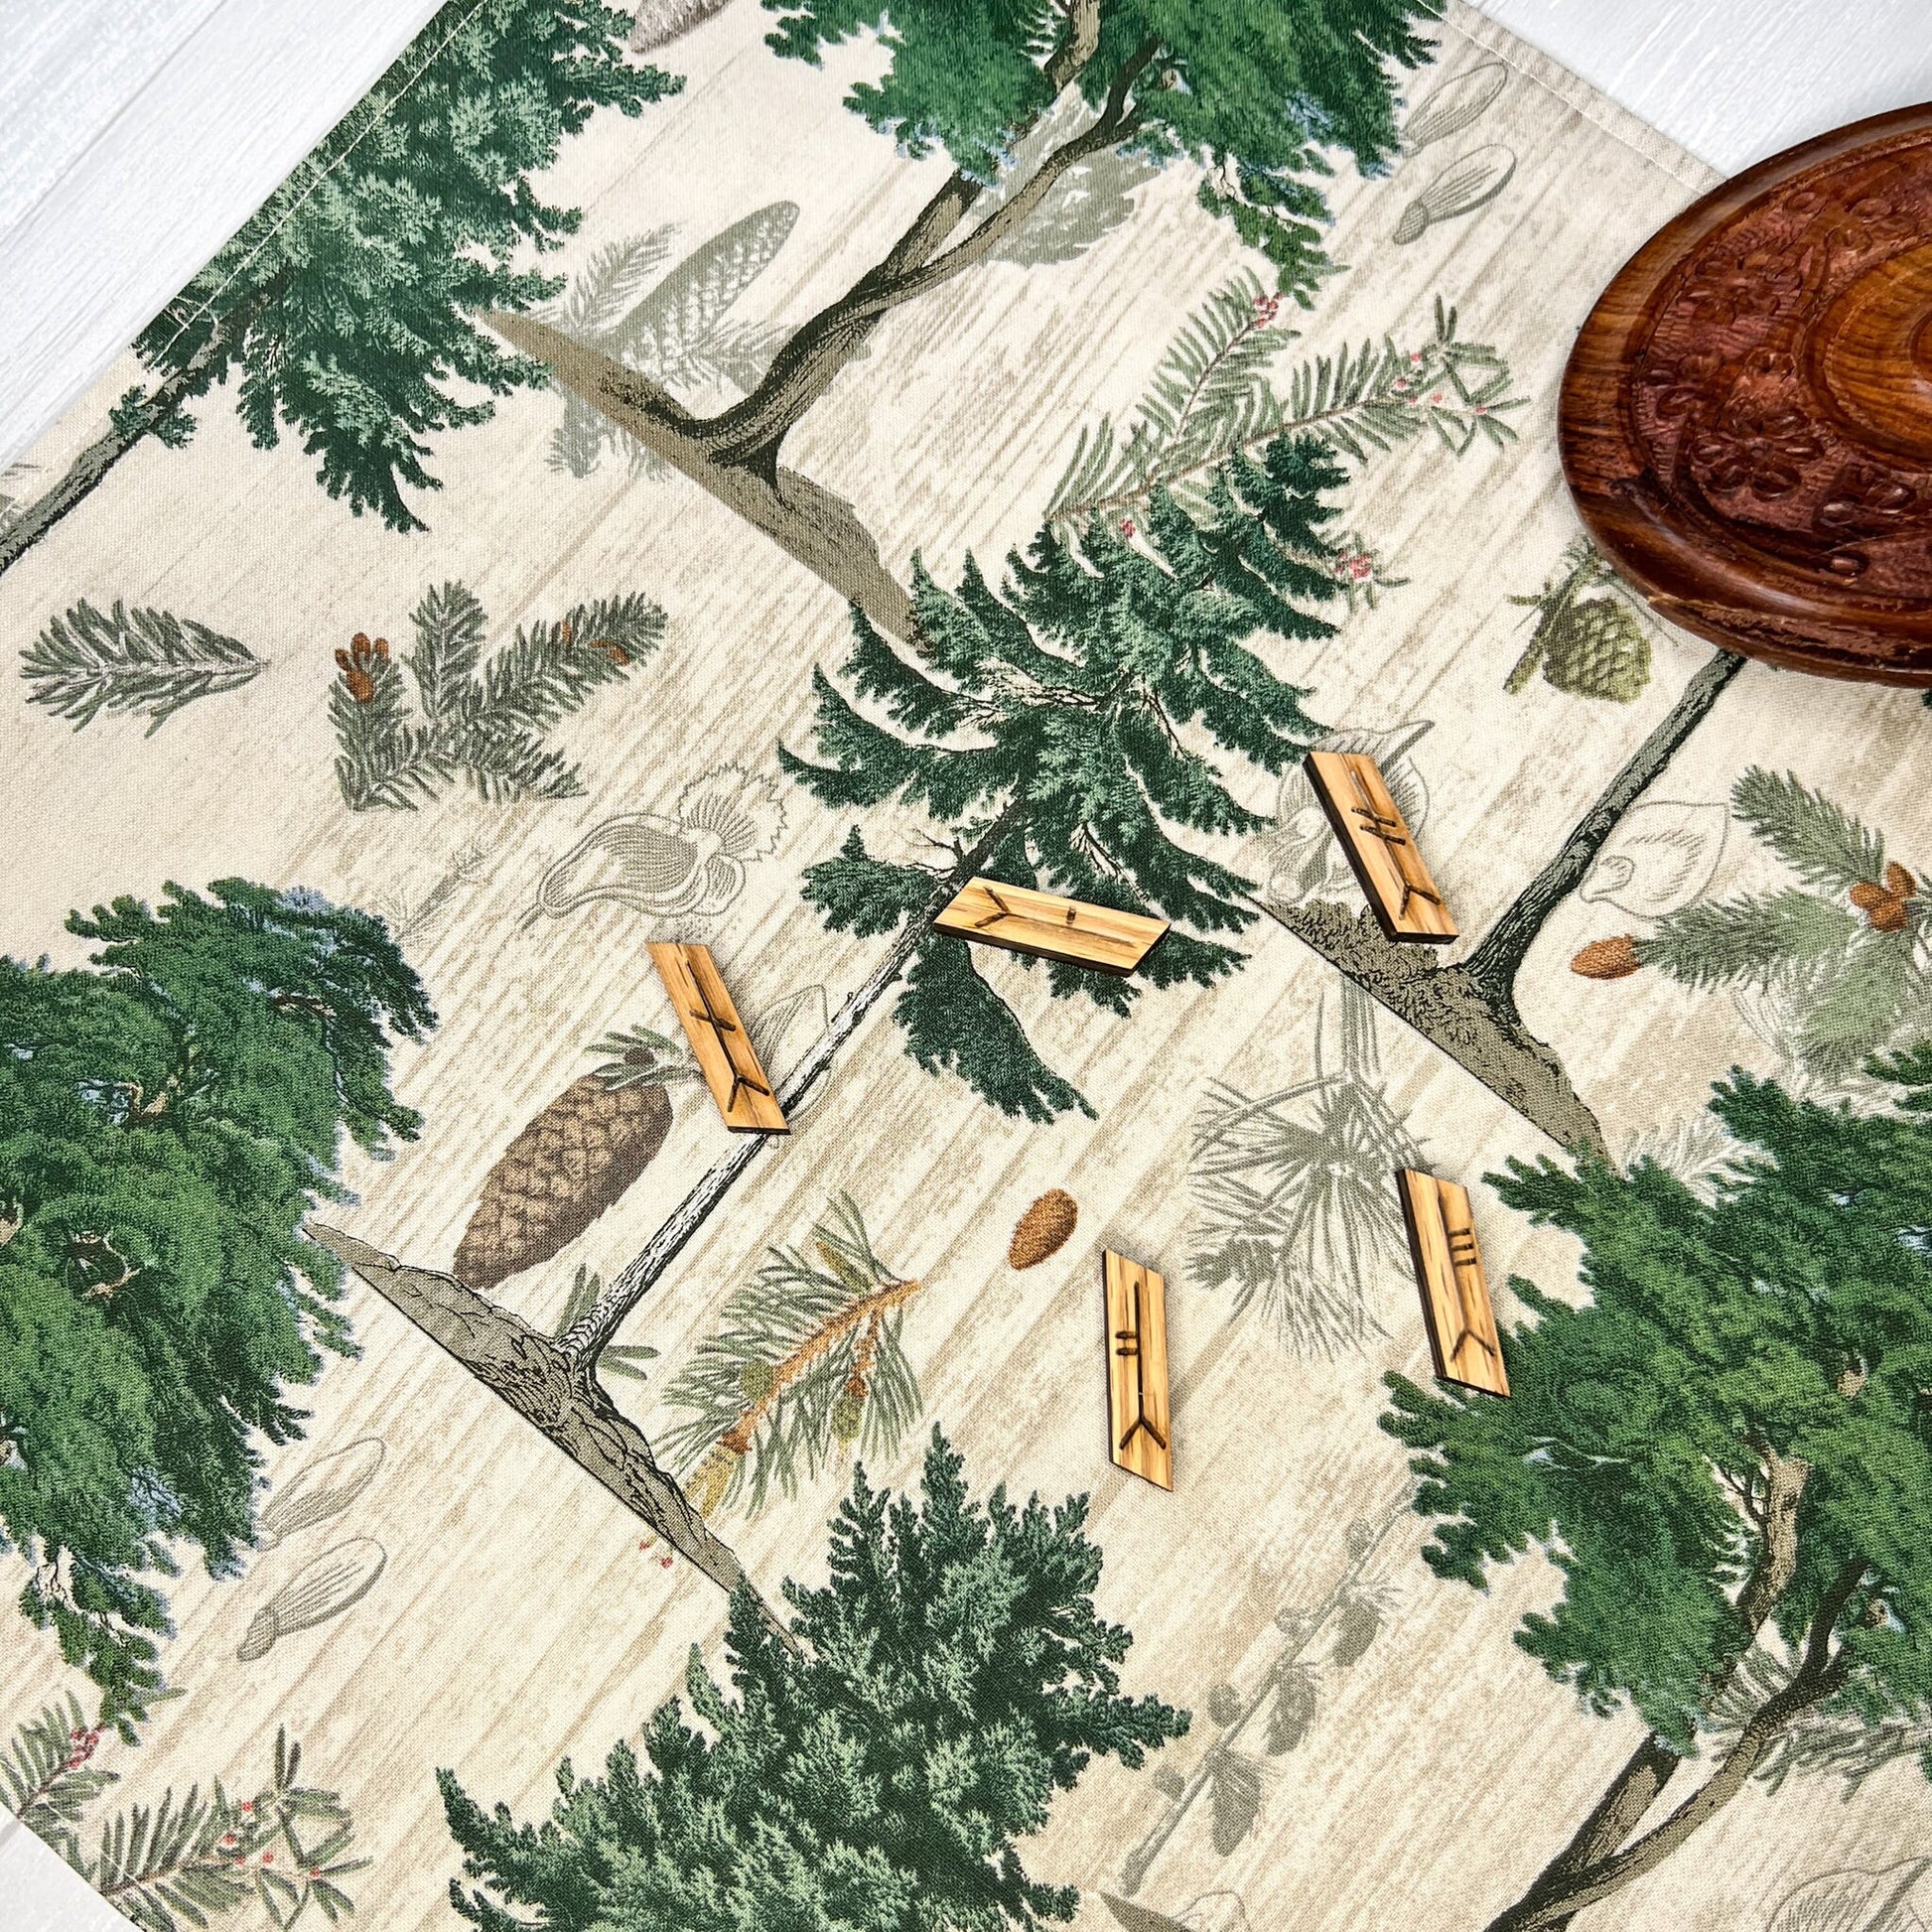 Tree Altar Cloth, Foresty Tarot Reading Cloth, Earthy Tarot Reading Supplies and Accessories, Rune Casting Cloth, Witch Tarot Reader Gifts